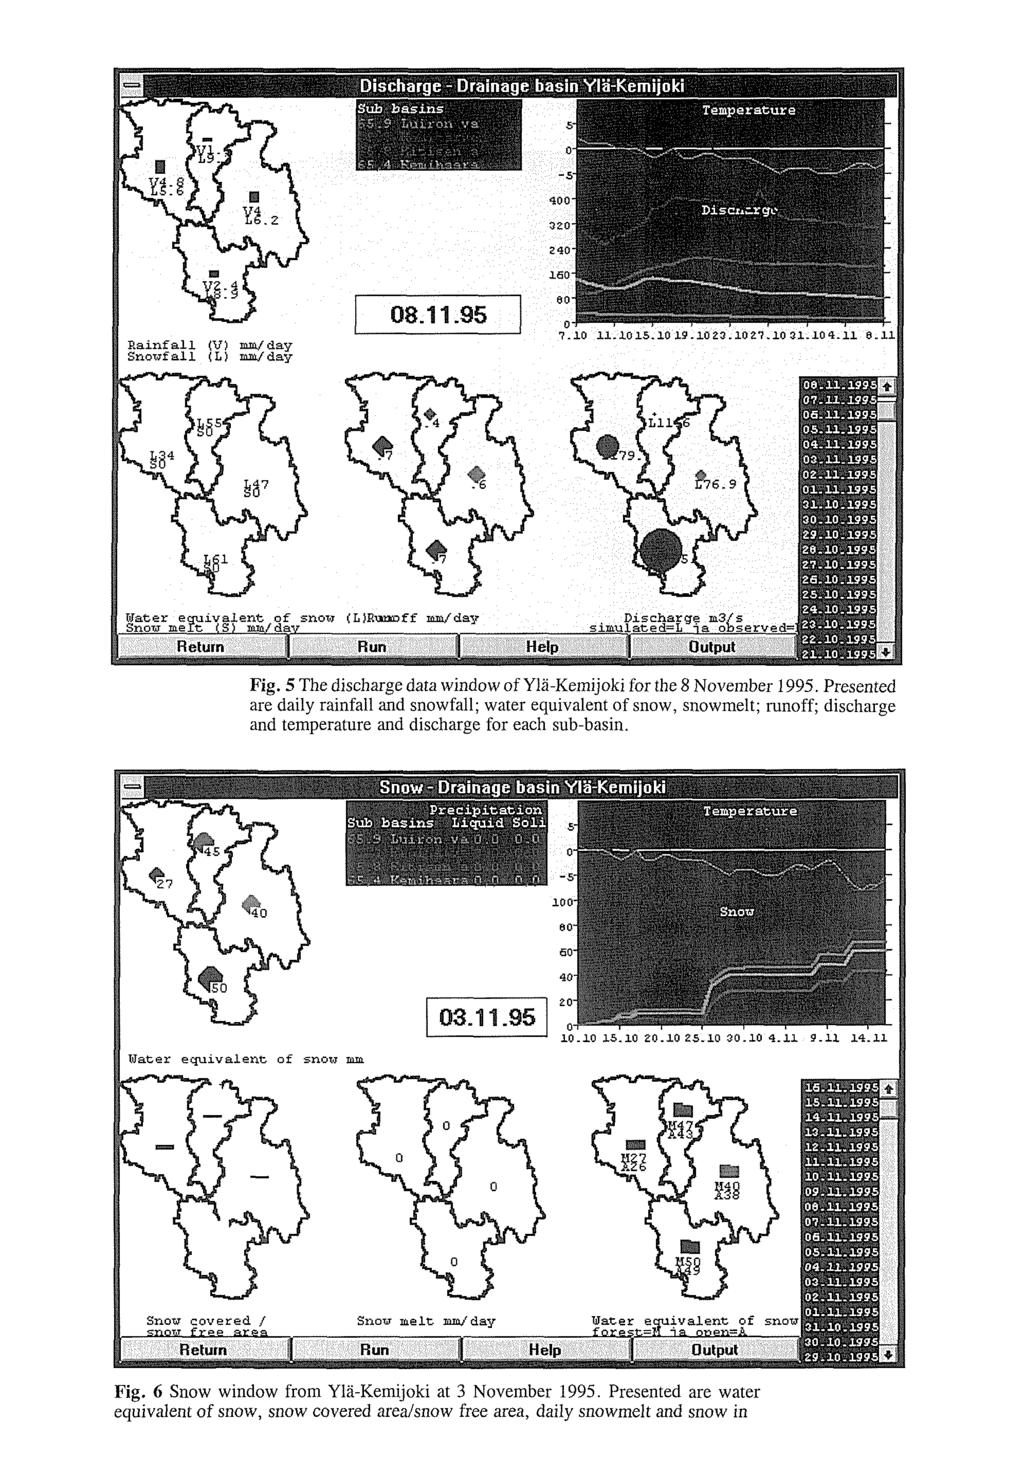 Fig. 5 The discharge data window of Ylà-Kemijoki for the 8 November 1995.